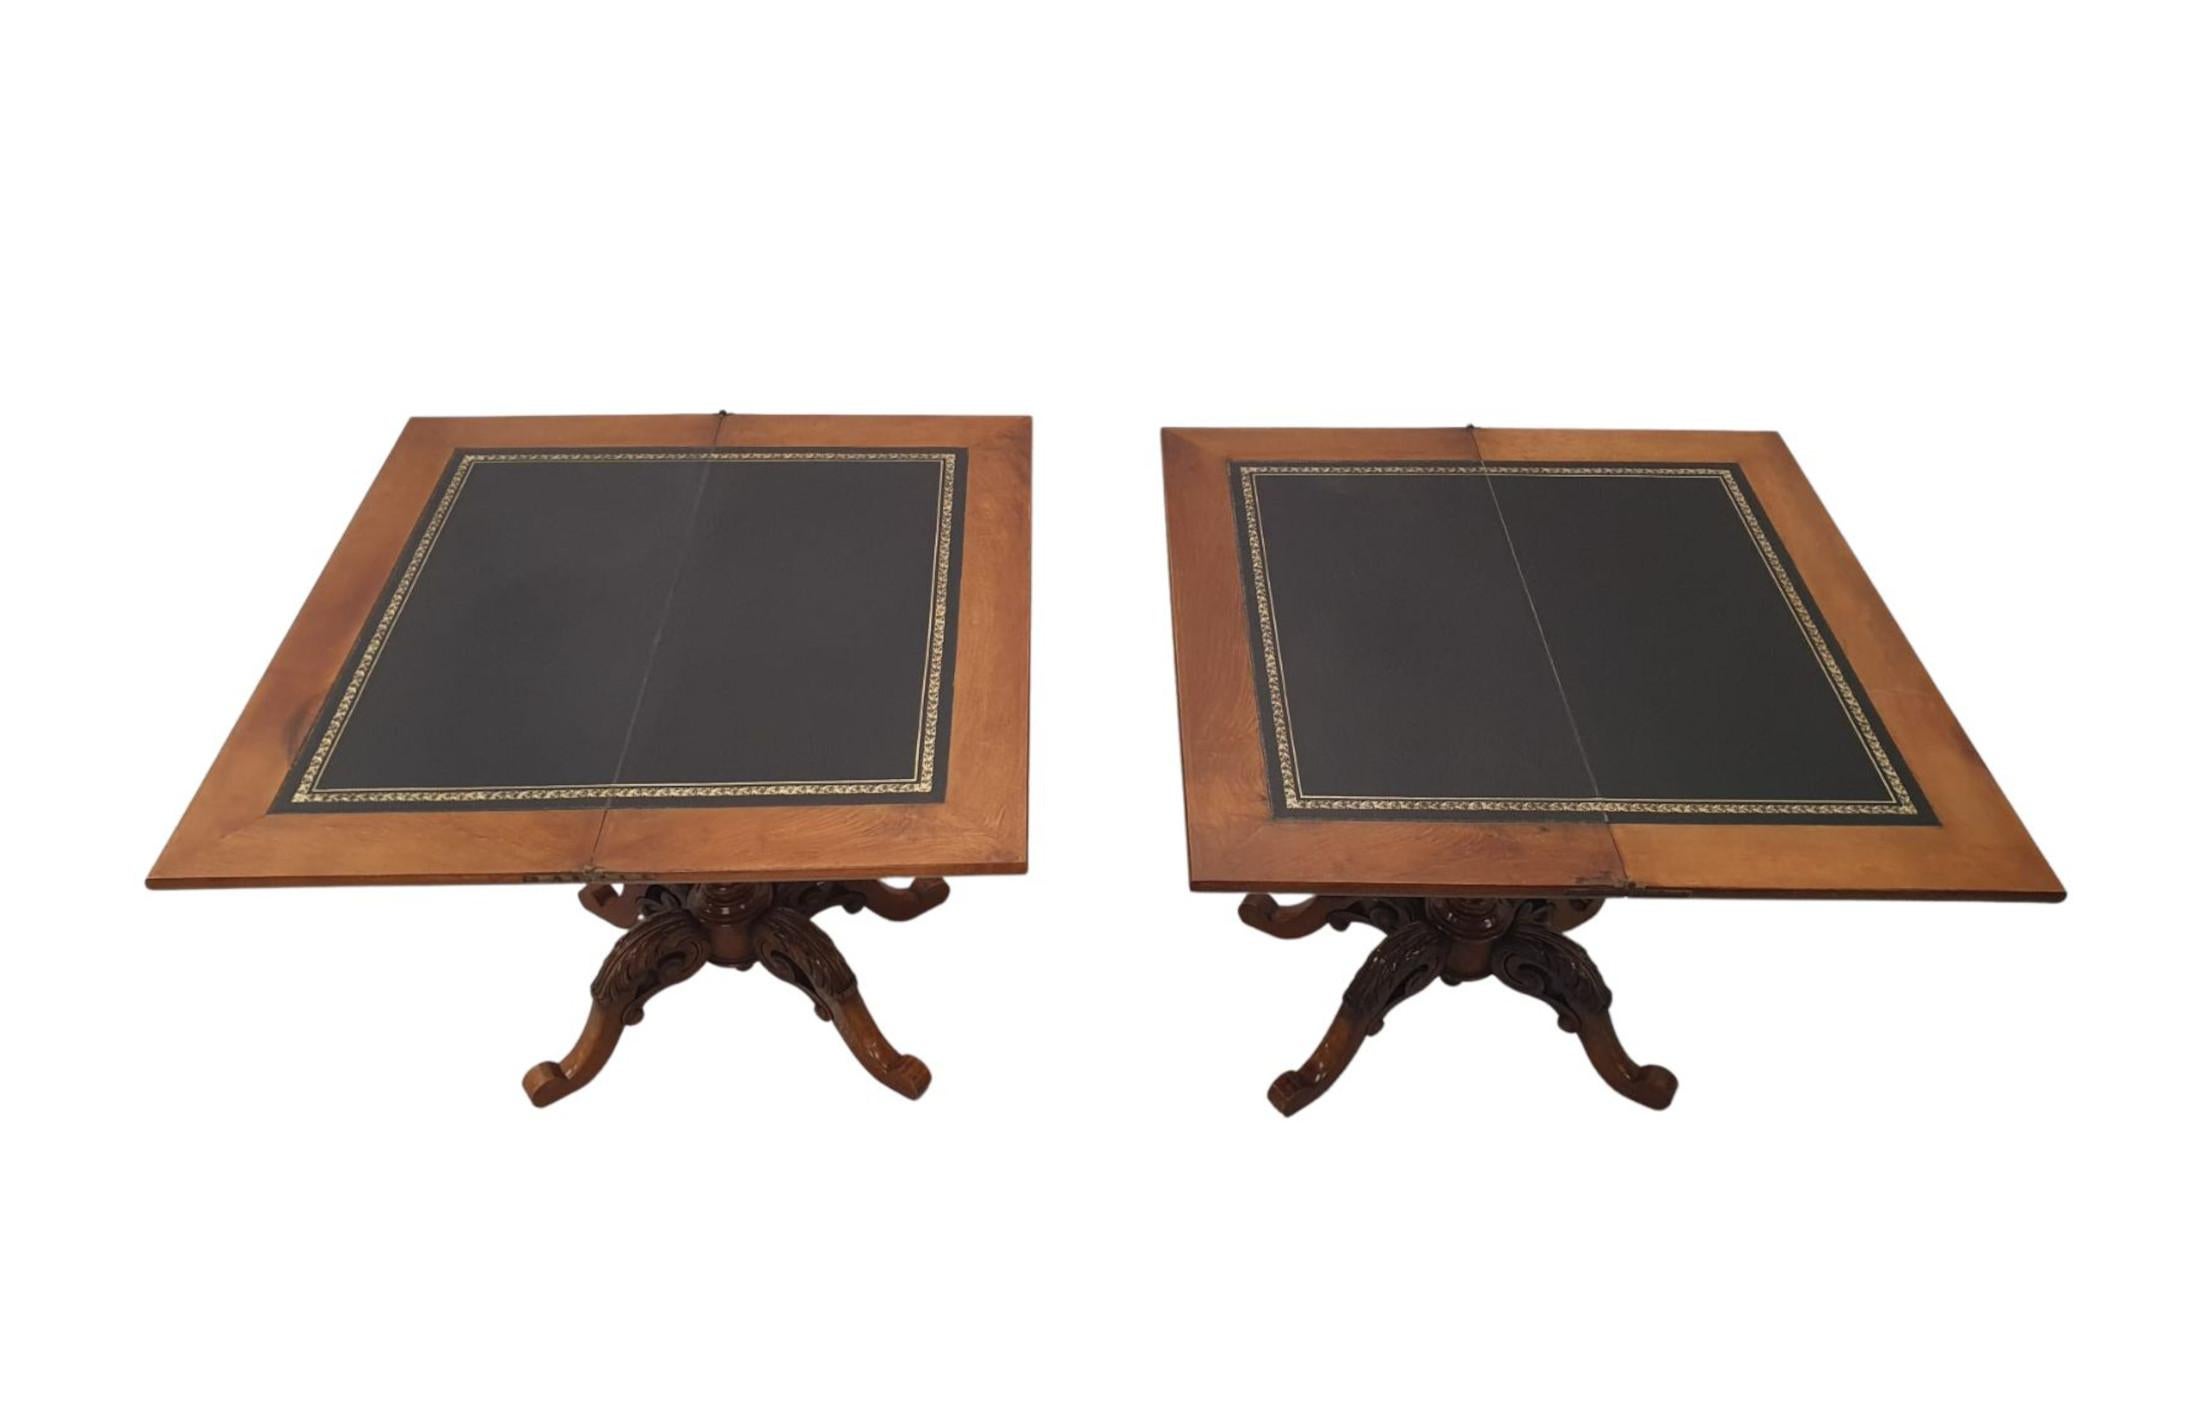 A superb pair of early 20th Century richly patinated walnut turn over leaf card tables of gorgeous quality with rich patination and grain. The hinged and moulded top of rectangular form folding over to reveal fitted gilt embossed tooled leather